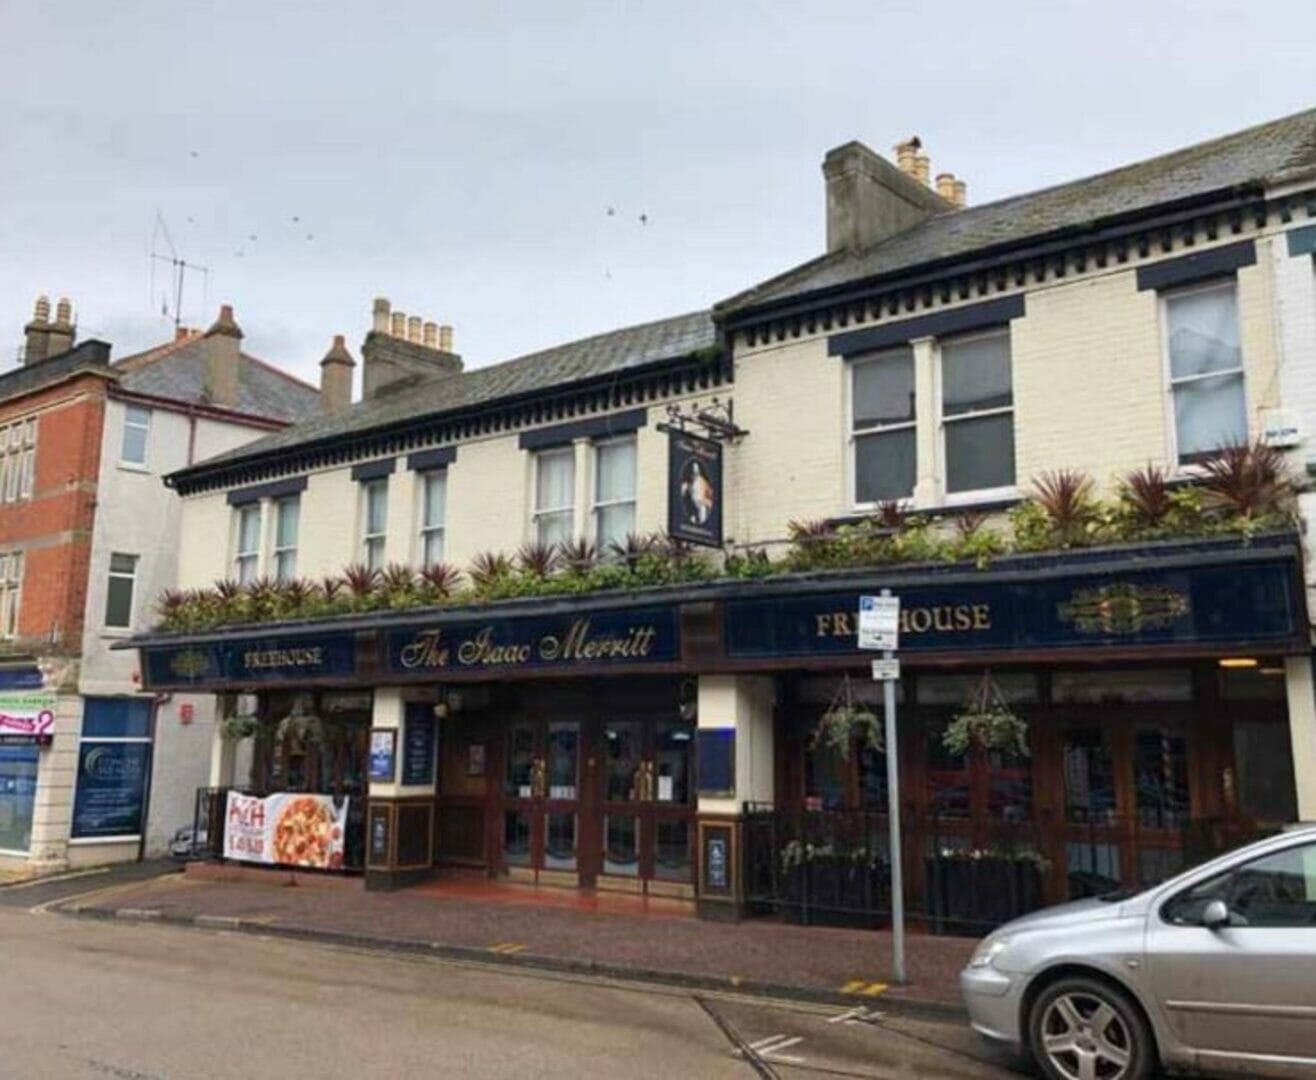 Devon family-friendly pub that was former Wetherspoons to go up for auction